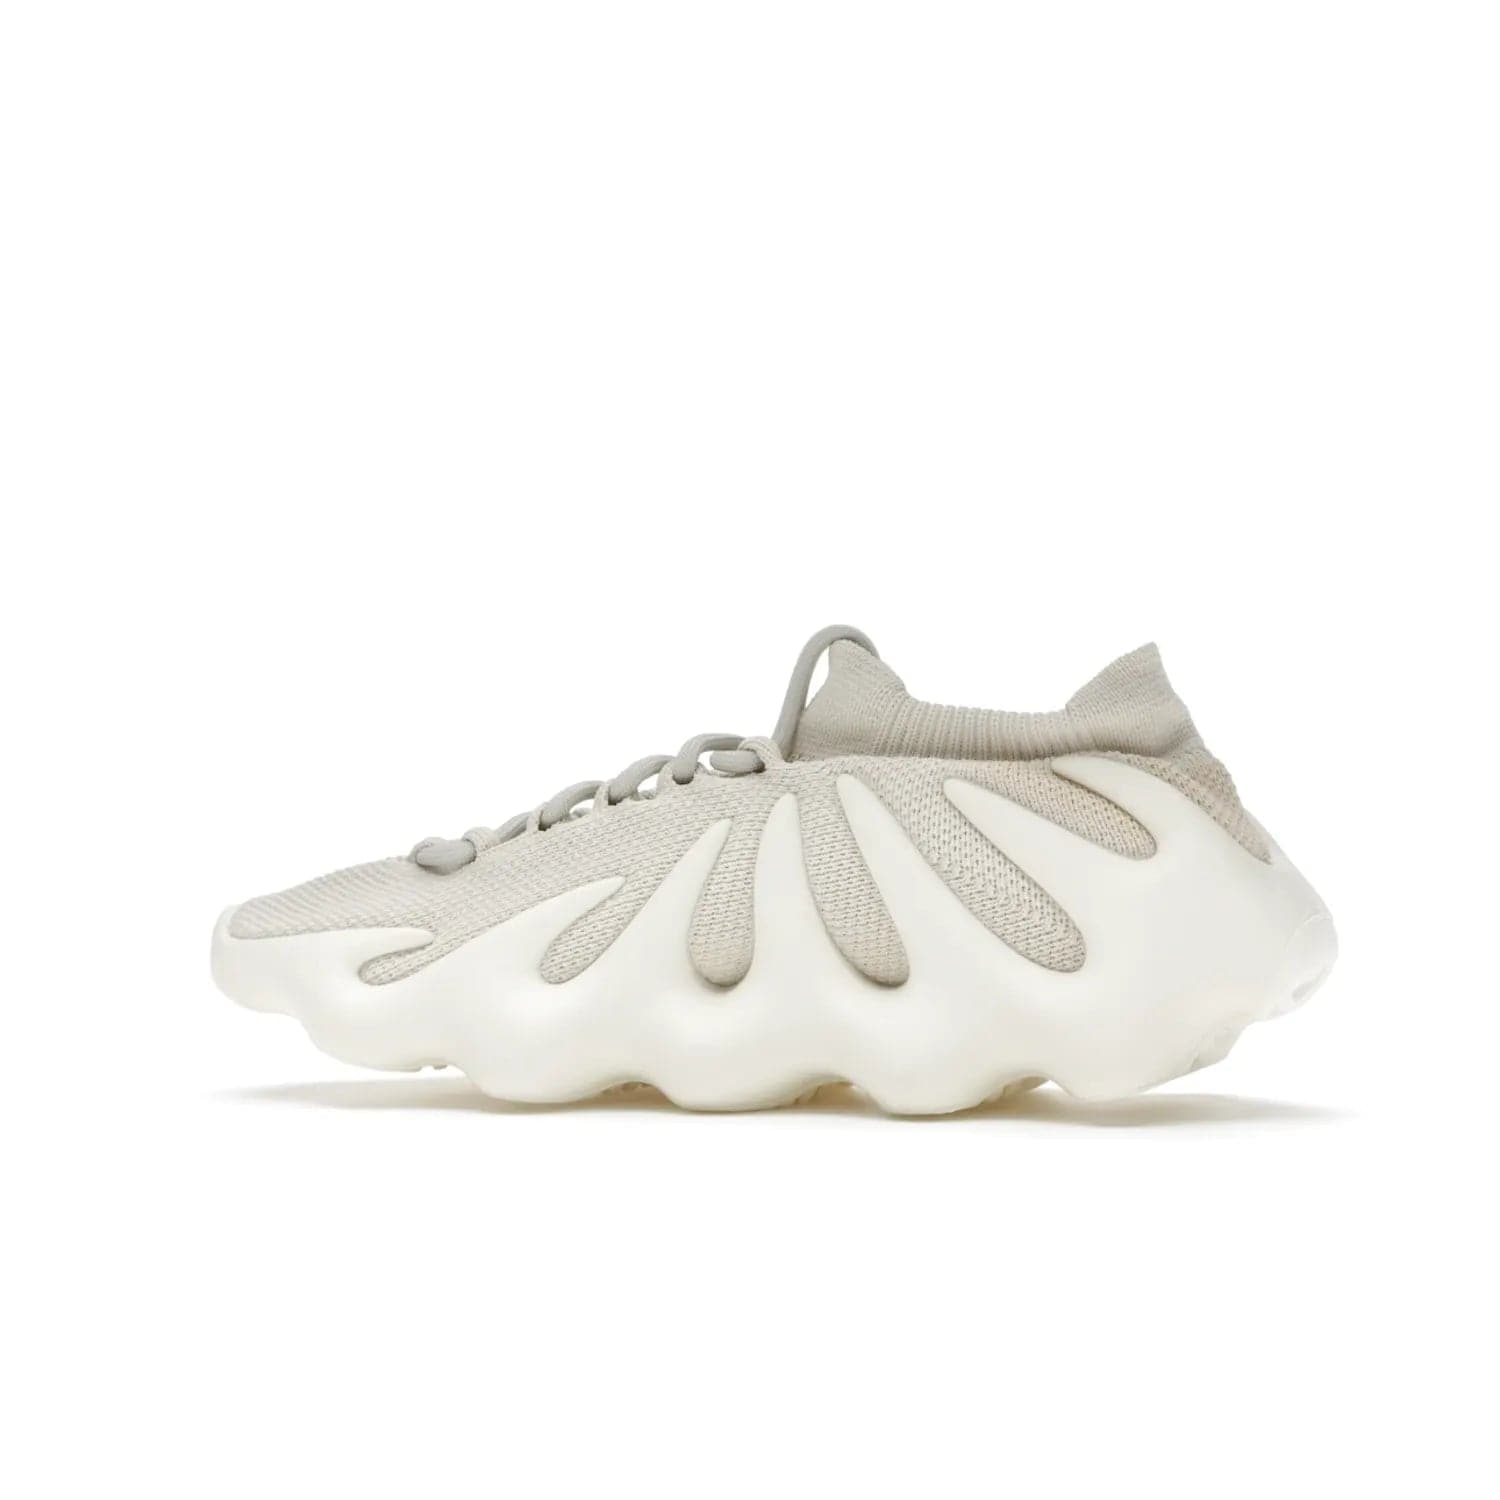 adidas Yeezy 450 Cloud White - Image 21 - Only at www.BallersClubKickz.com - Experience the future with the adidas Yeezy 450 Cloud White. A two-piece design featuring an extreme foam sole and mesh upper, this silhouette is expected to release in March 2021. Get your hands on this striking Cloud White/Cloud White colorway and stand out in the crowd.